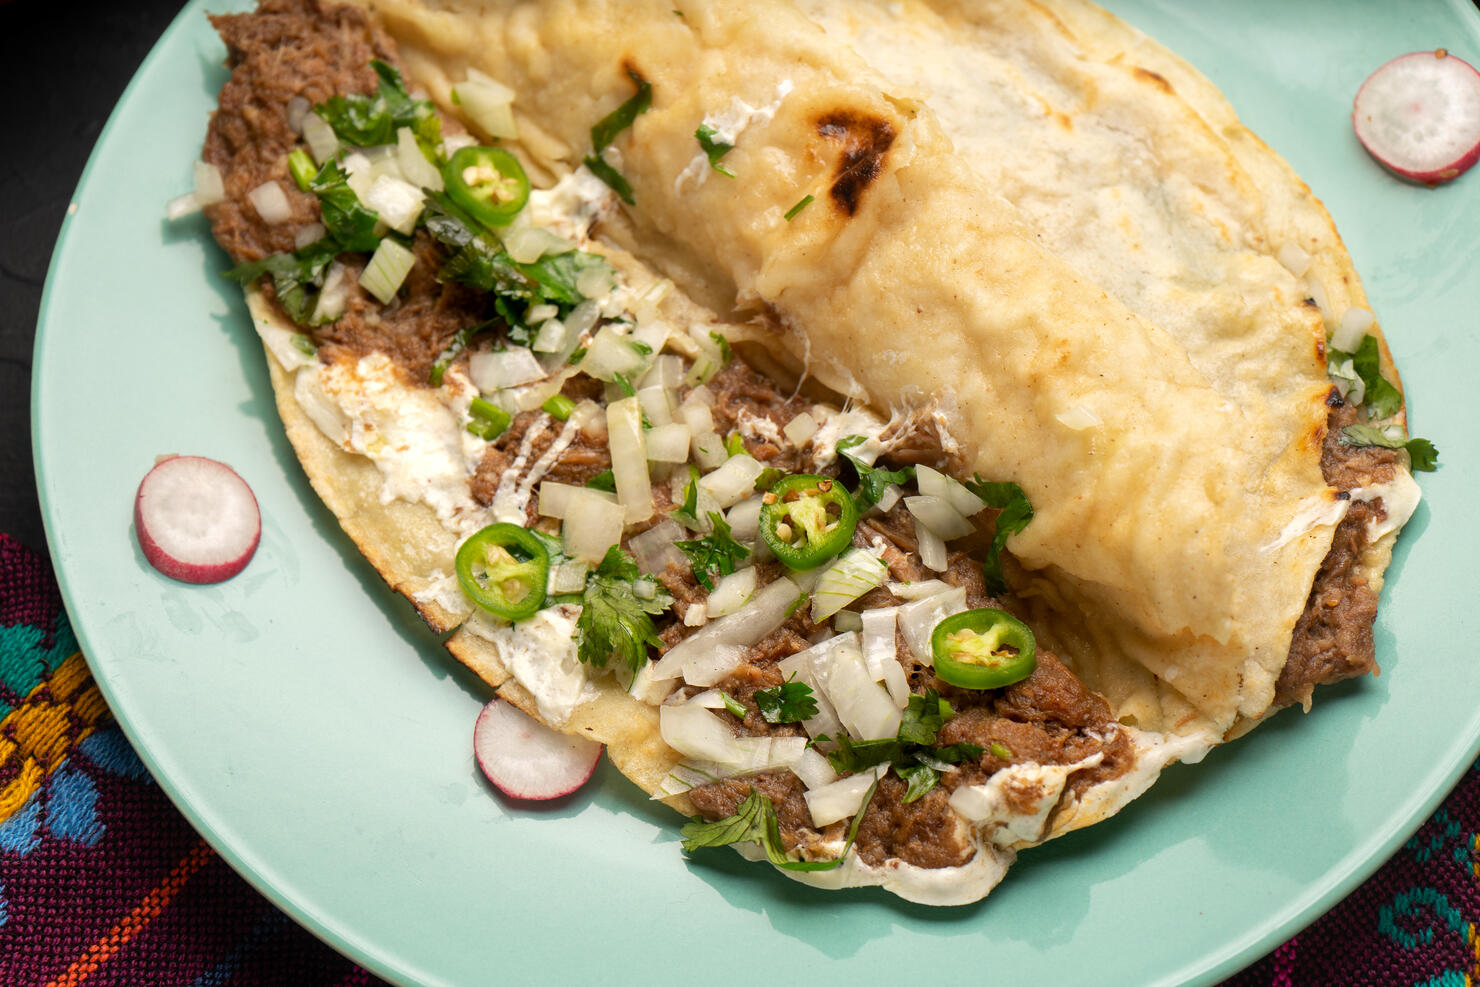 Quesadilla with beef barbacoa and sauce. Mexican food